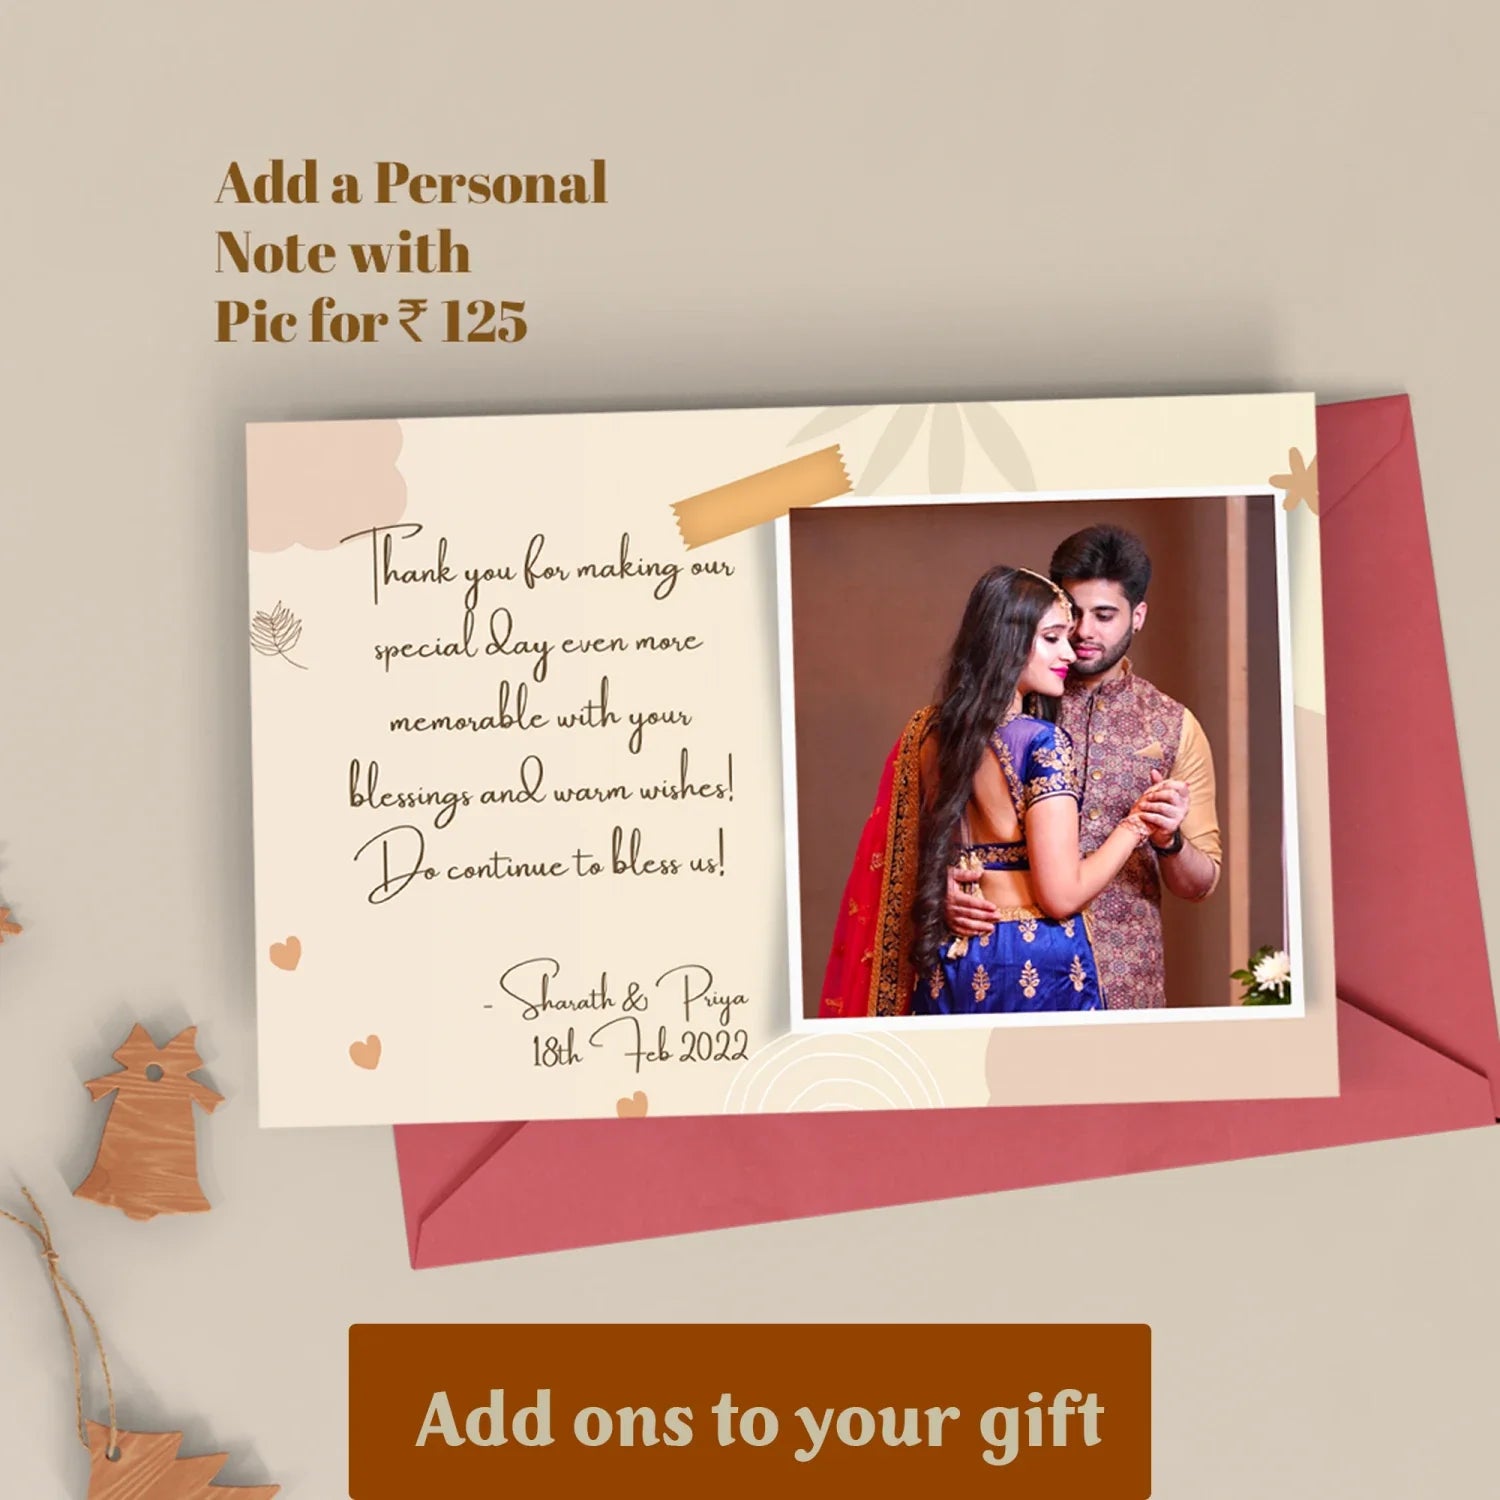 Personalised All in One Men's Combo (4 pcs) - Wine- YOUR GIFT STUDIO. Add your personal note and polaroid picture to customise the gifts and give it a personal touch.